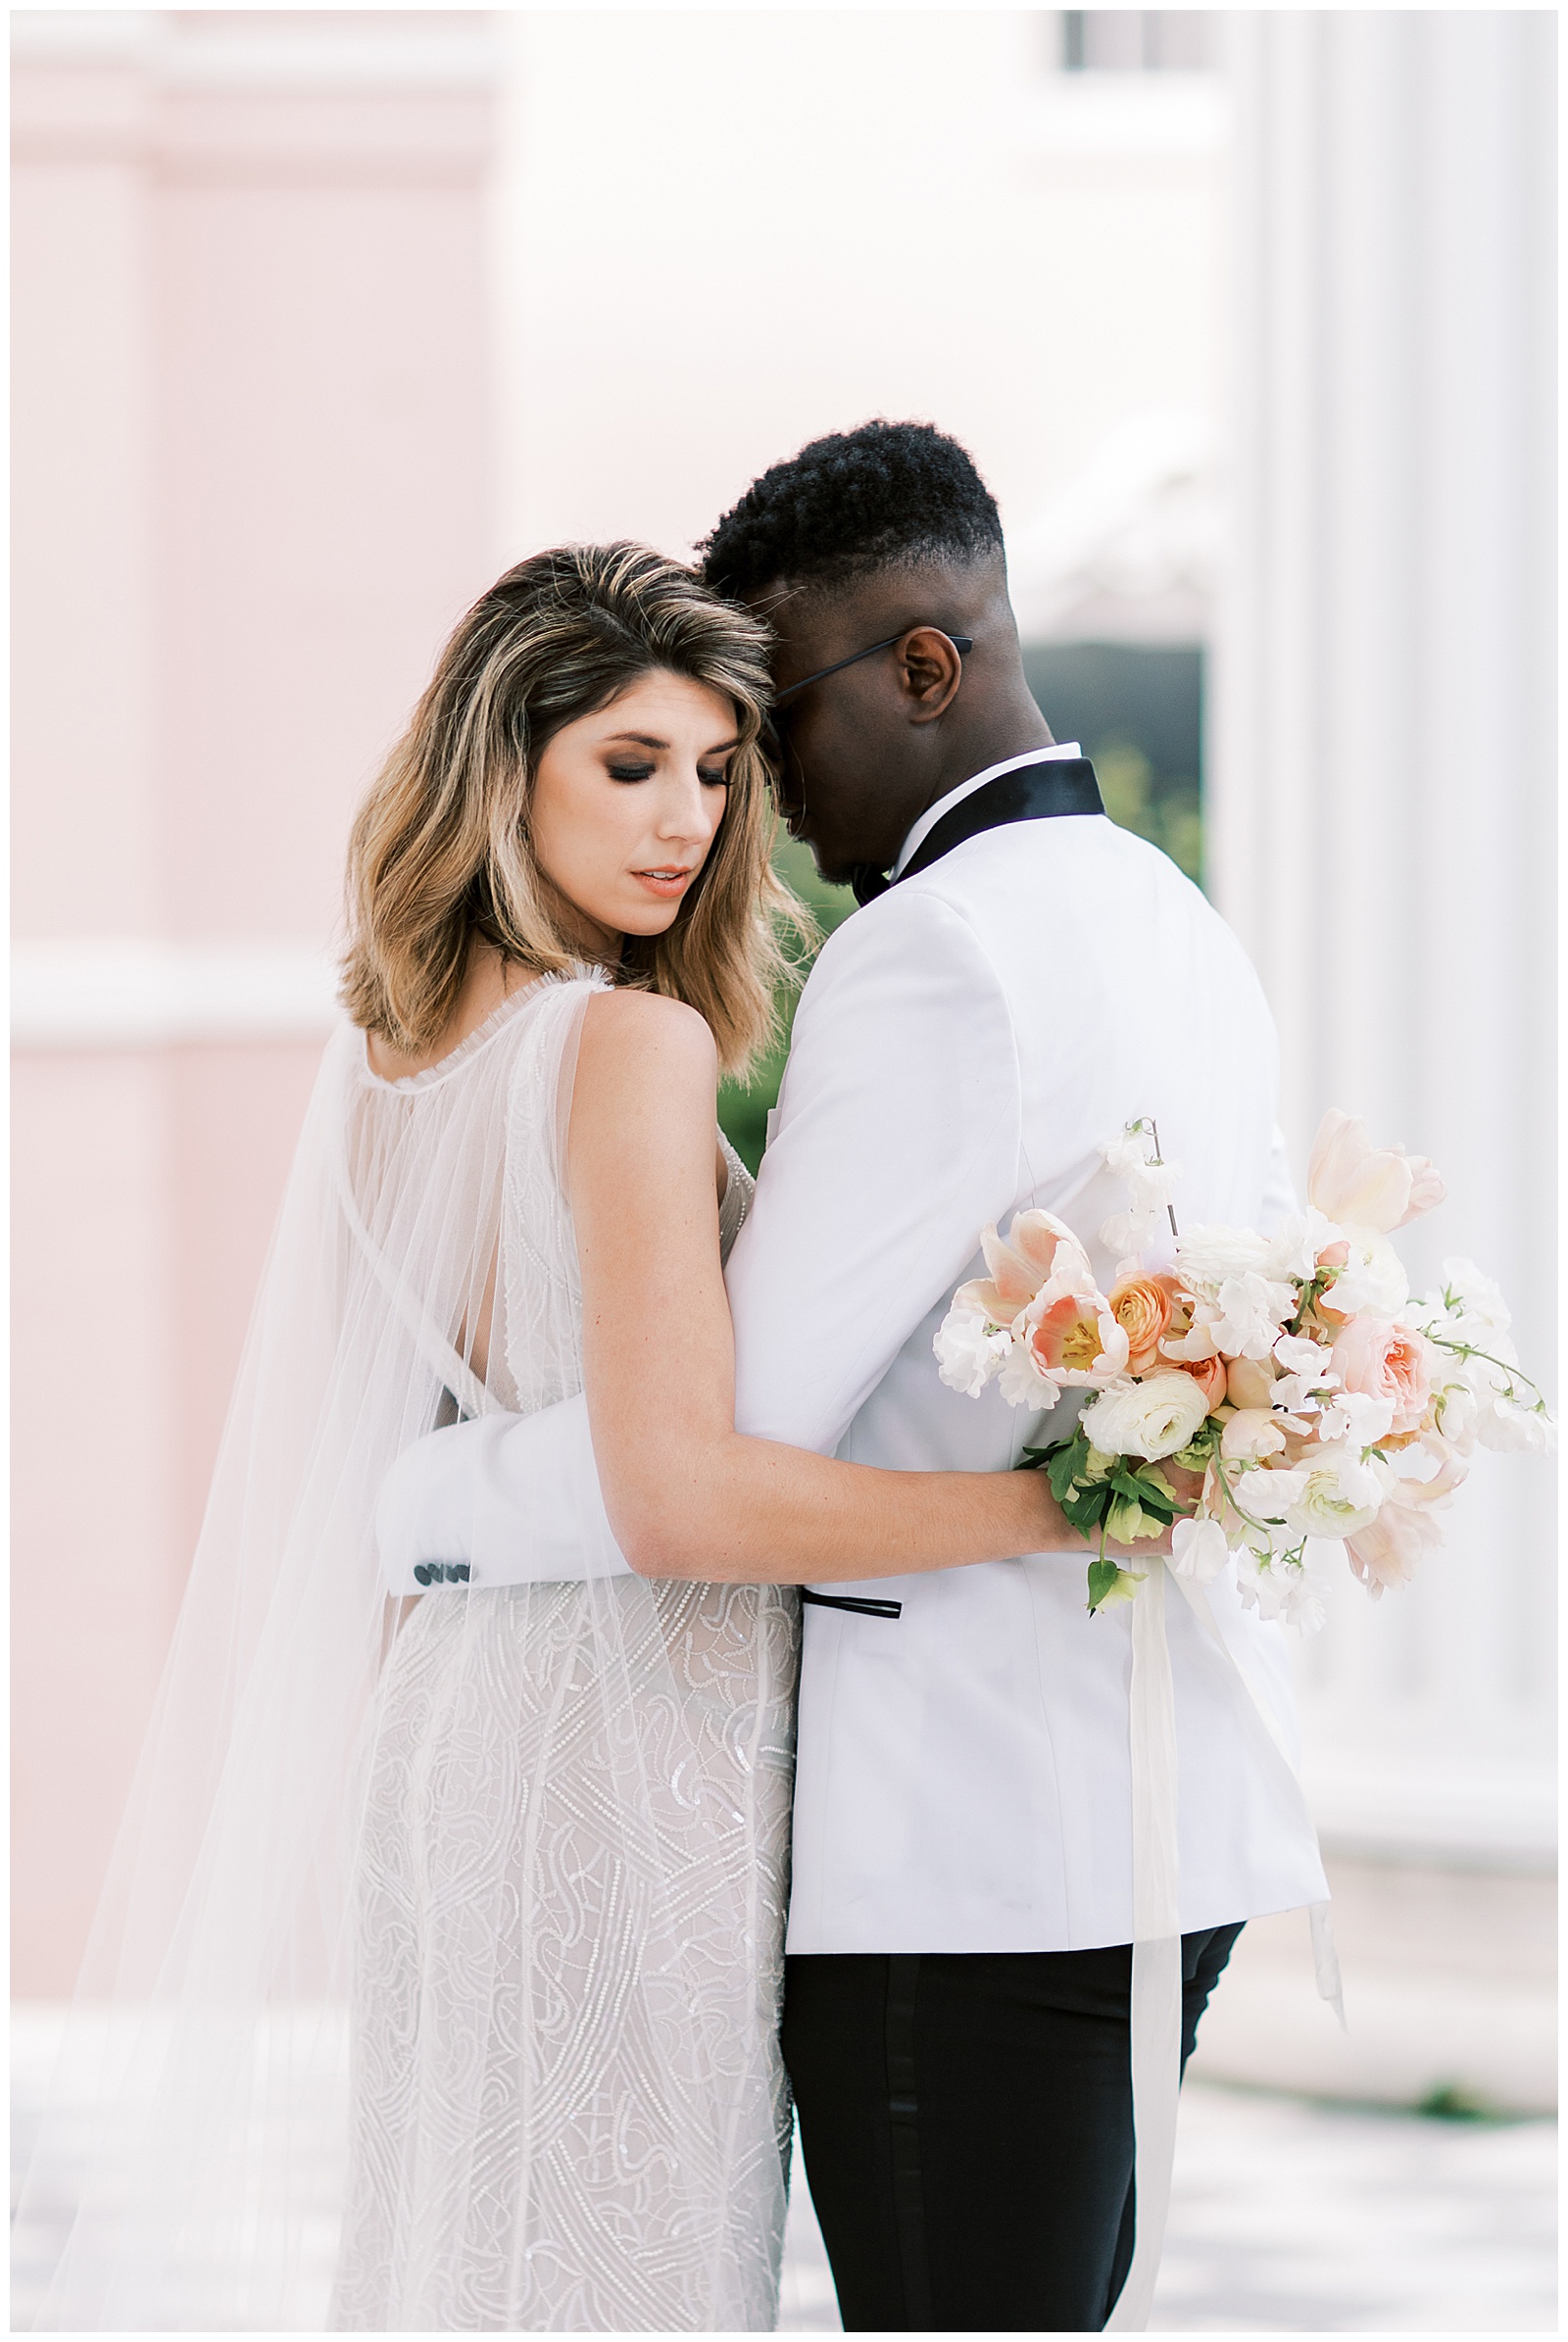 Blonde haired woman with a white wedding dress and tulle cape is embraced by a dark skinned man in a white tuxedo on the porch of the william aiken house in charleston sc